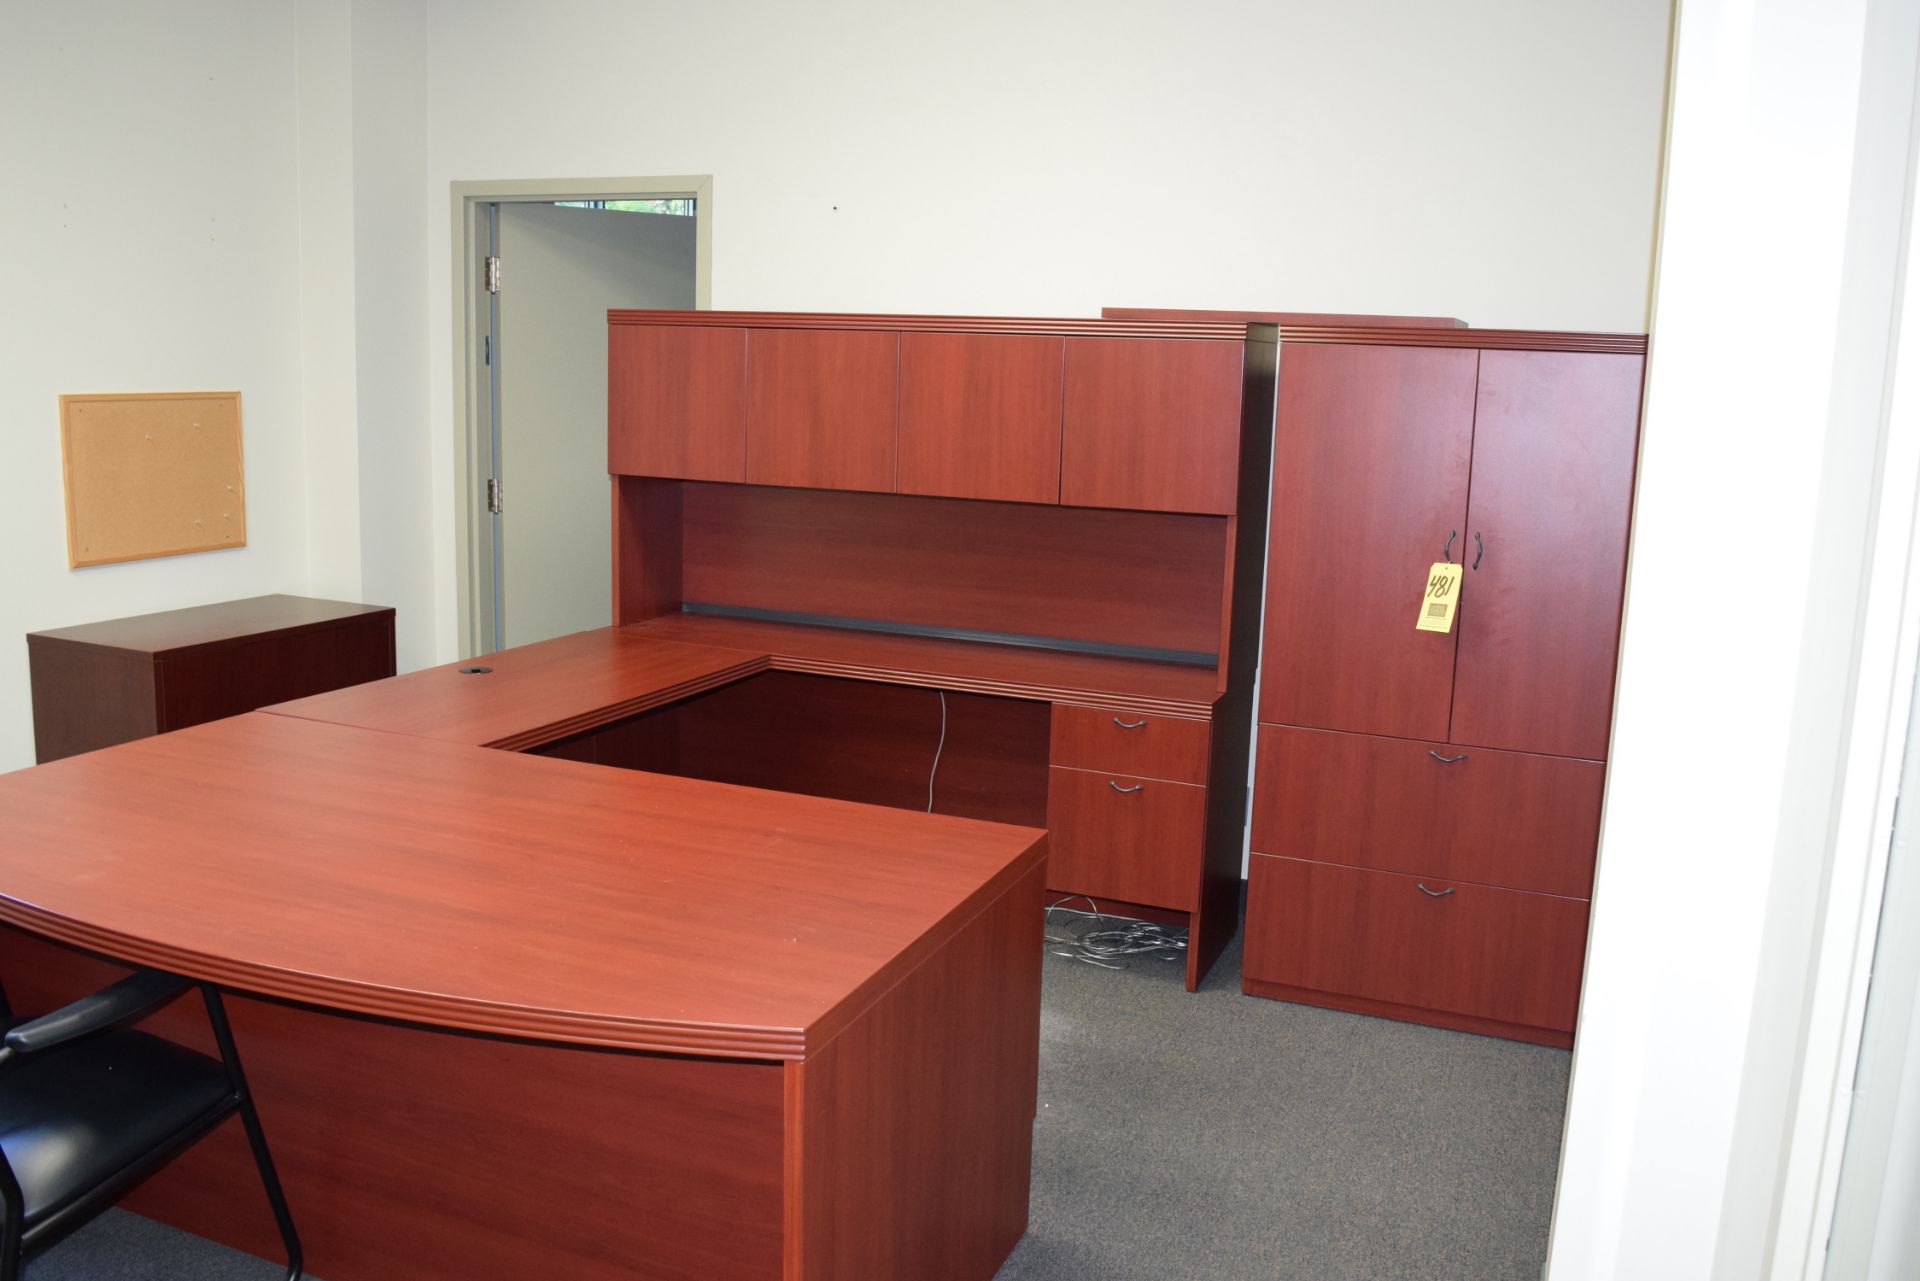 U-Shaped Desk, Book Cases, Lateral File Cabinet, Round Table, and Chair Rigging Charge:250